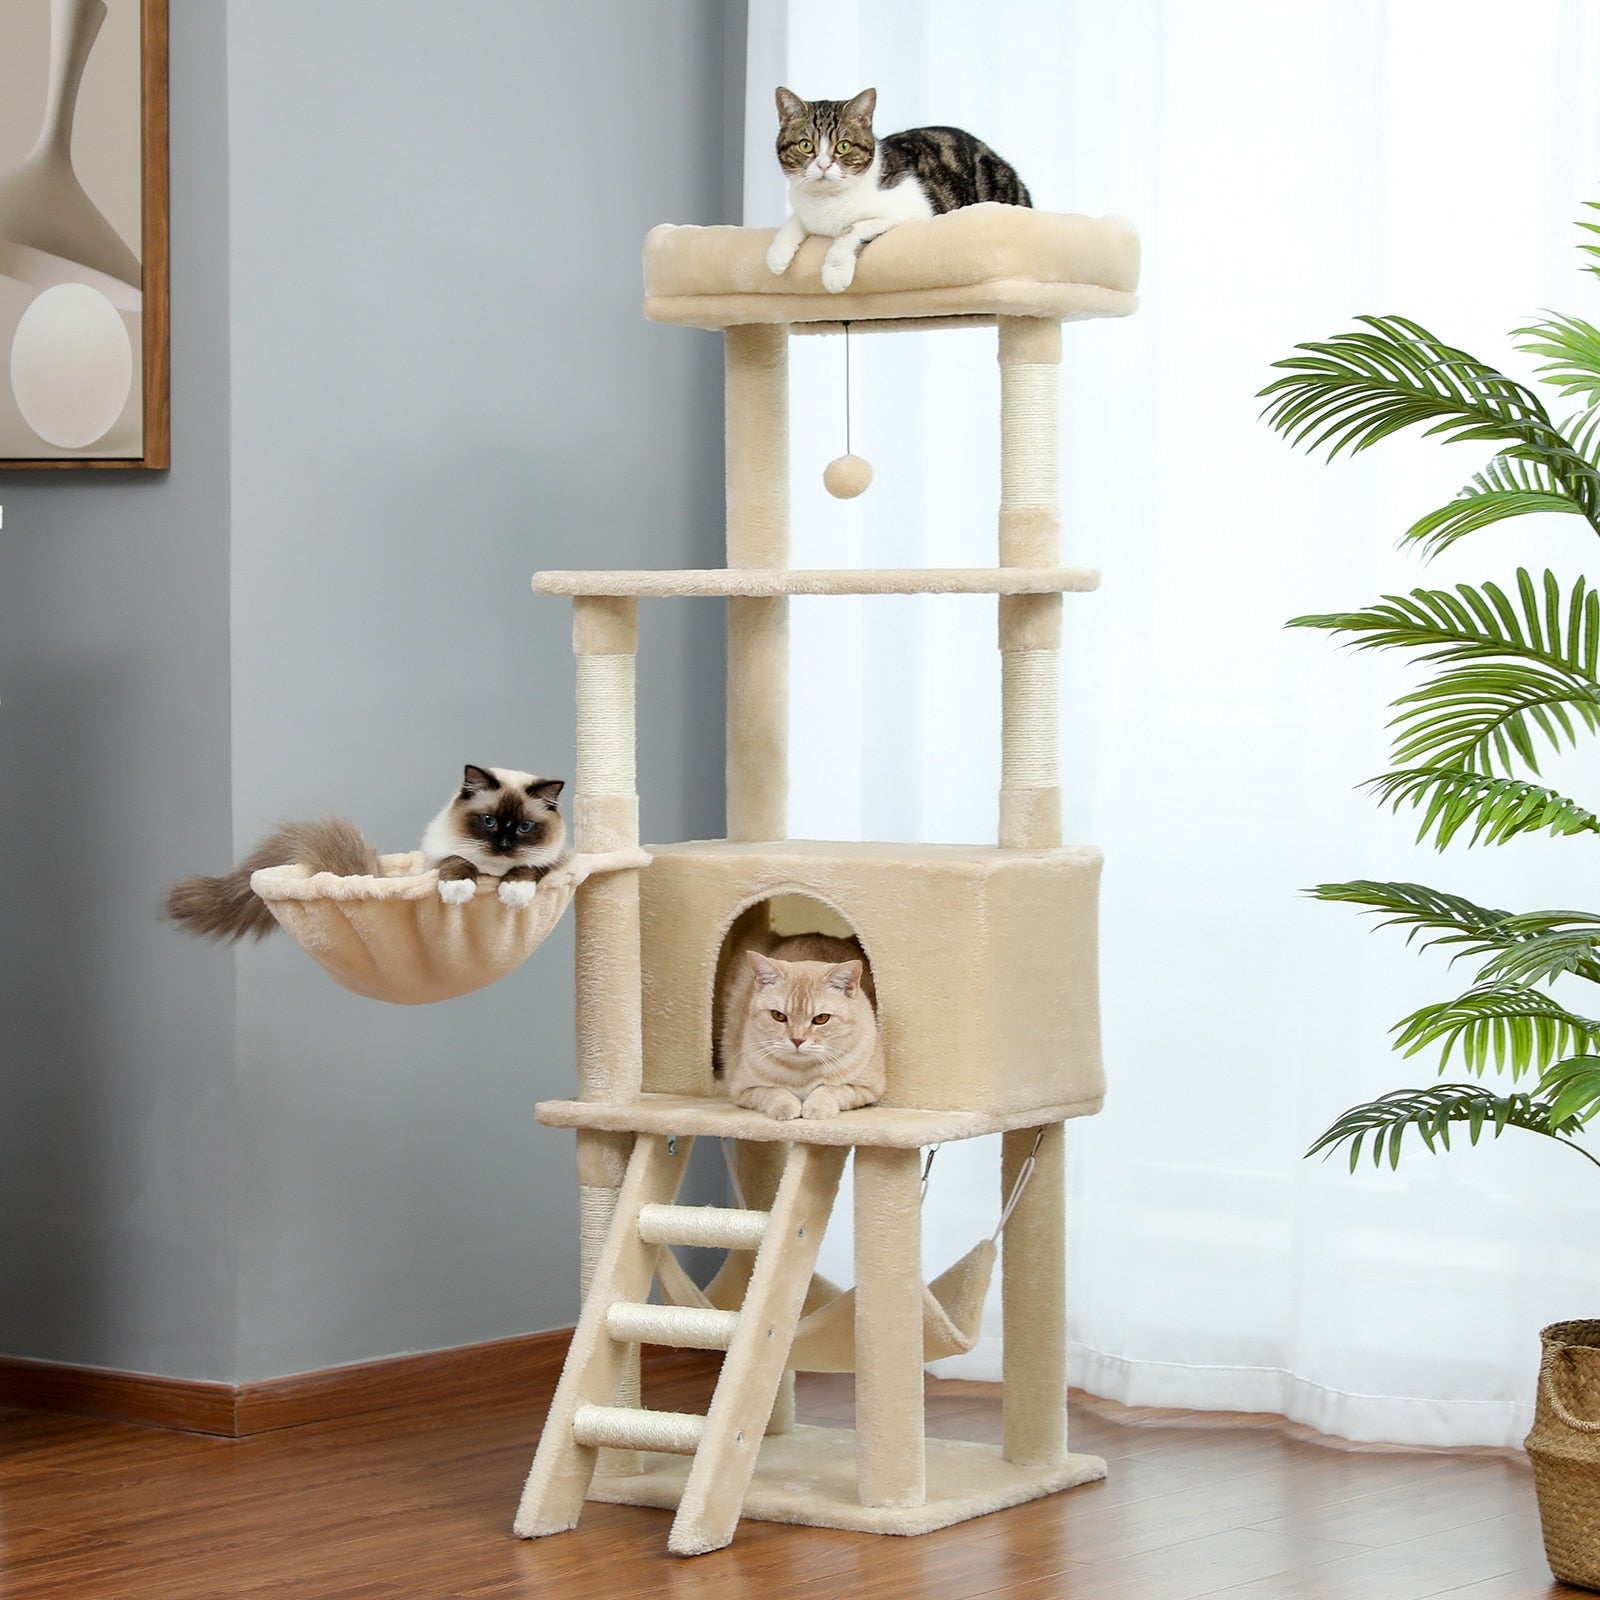 Large Cat Scratching Post - Cat scratching post